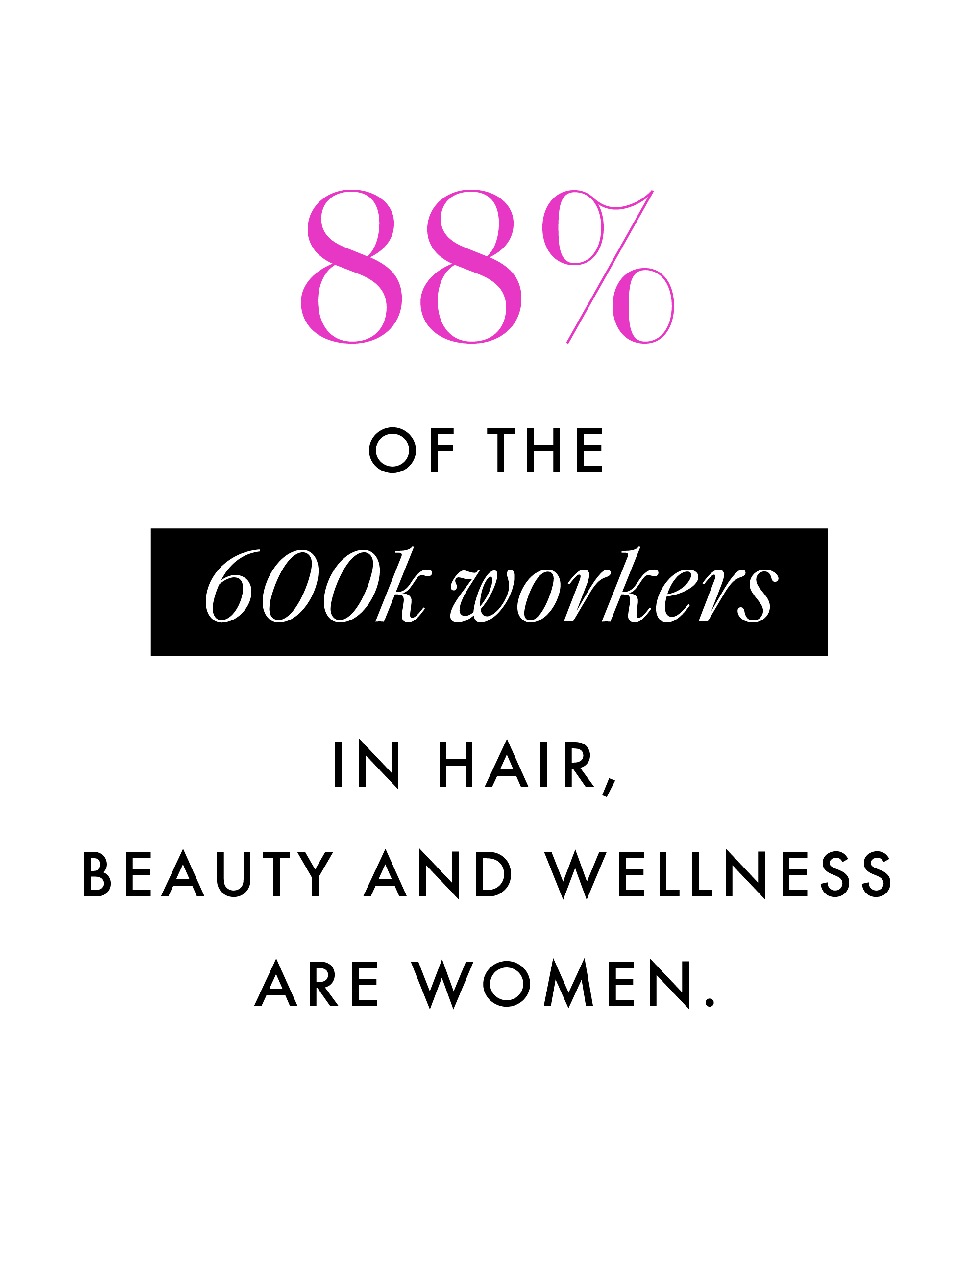 88 percent of 600k workers in hair beauty and wellness are women